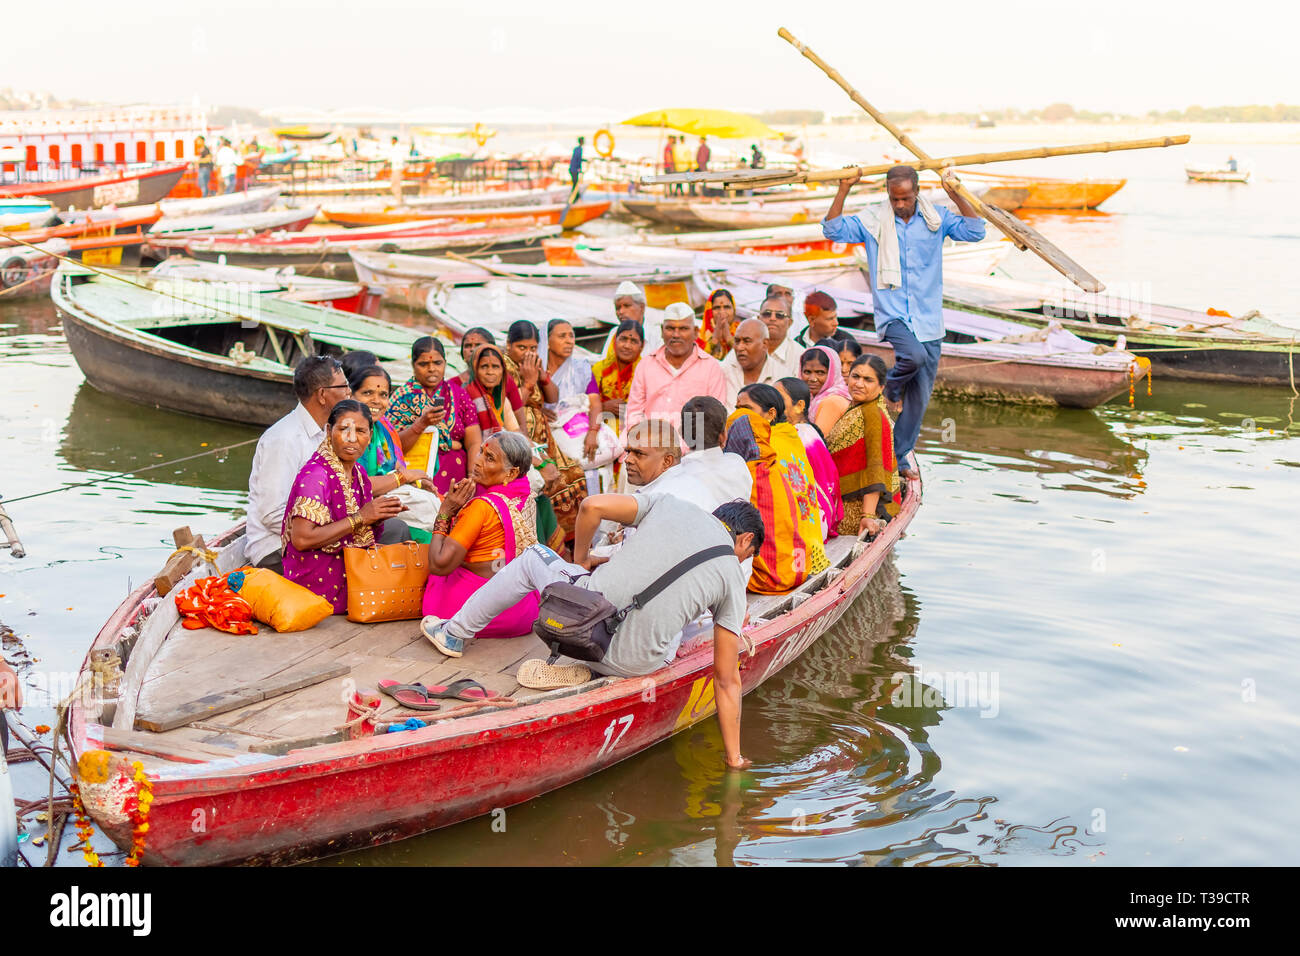 VARANASI, INDIA, 10 MAR 2019 - A lot of people sit on the crowded boats to cross the Ganges River Stock Photo